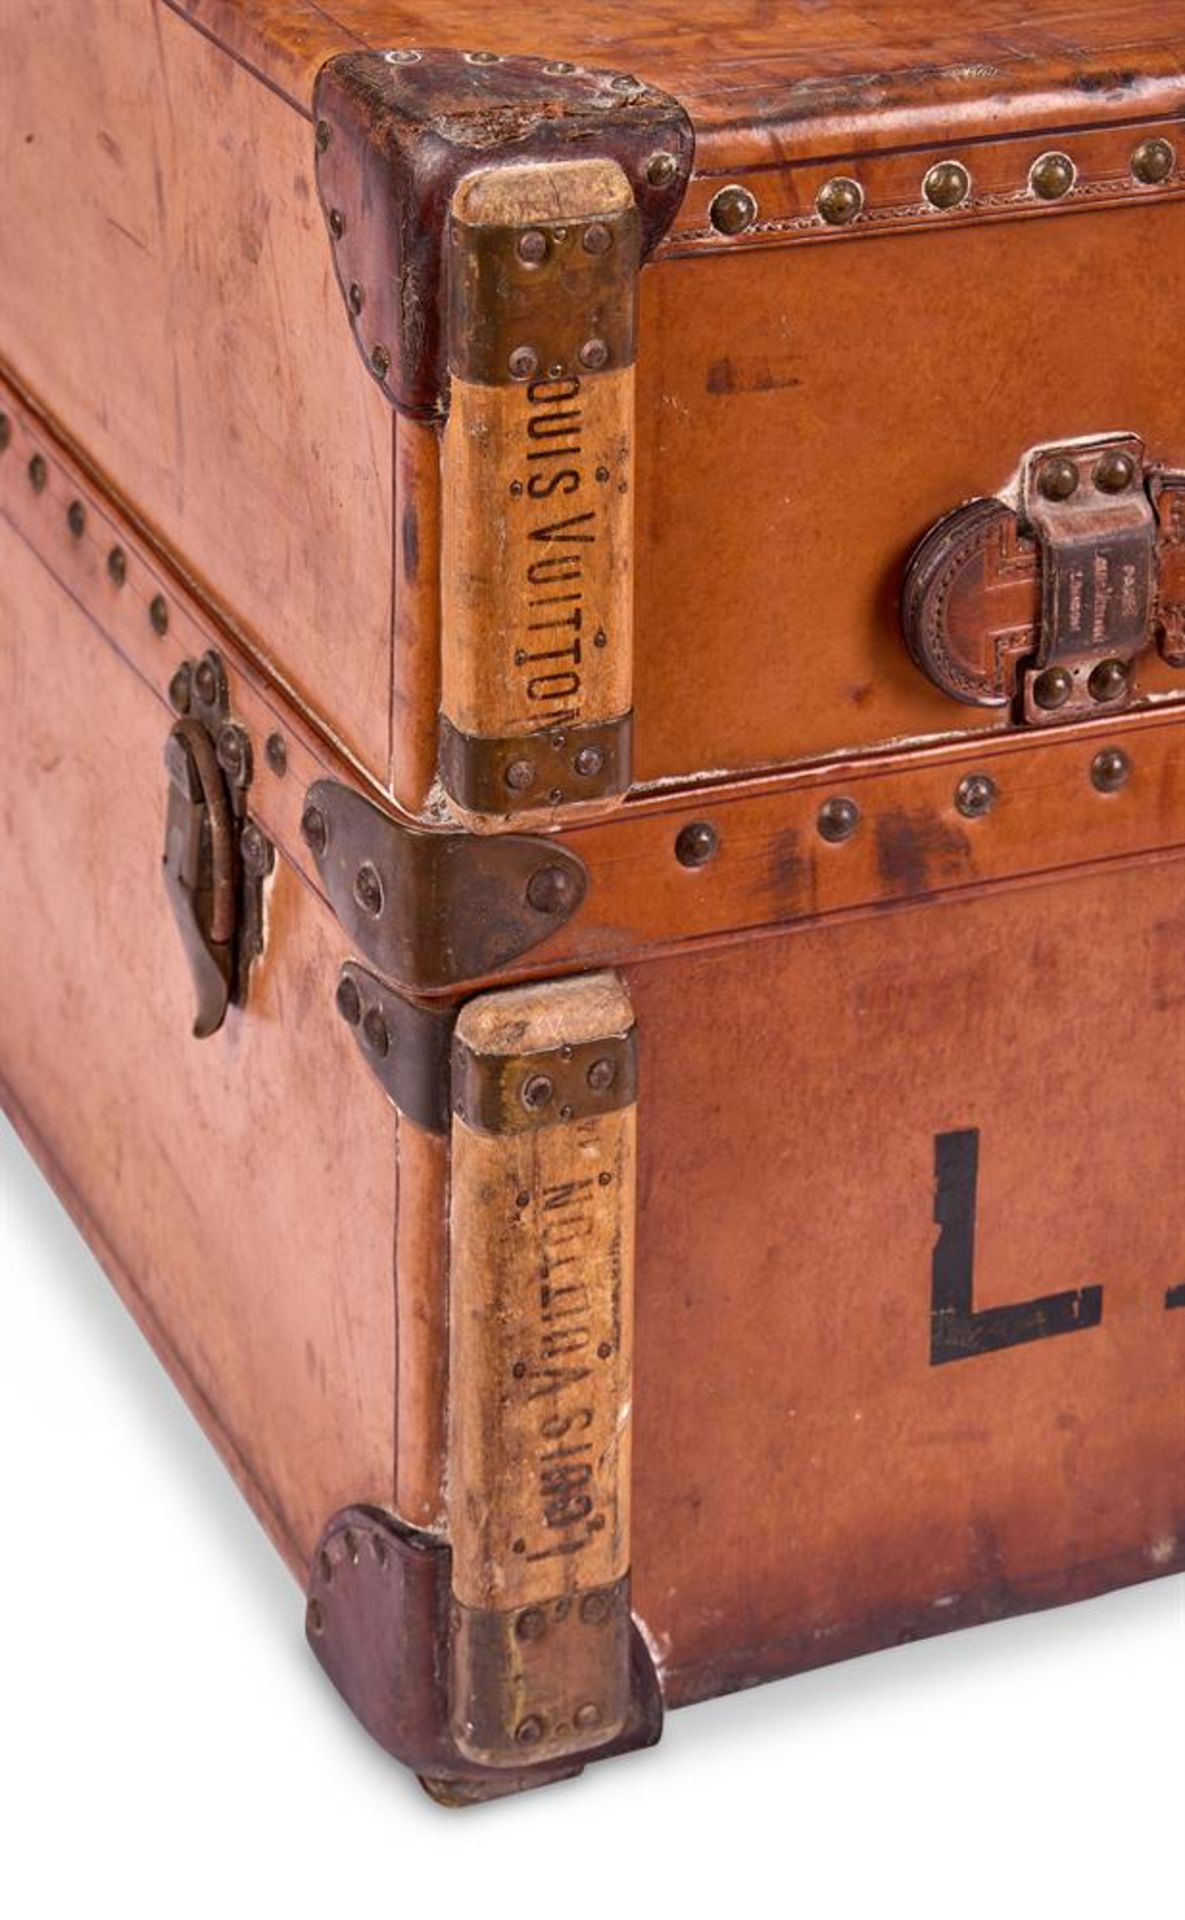 LOUIS VUITTON, A BROWN LEATHER WARDROBE STEAMER TRUNK - Image 2 of 5